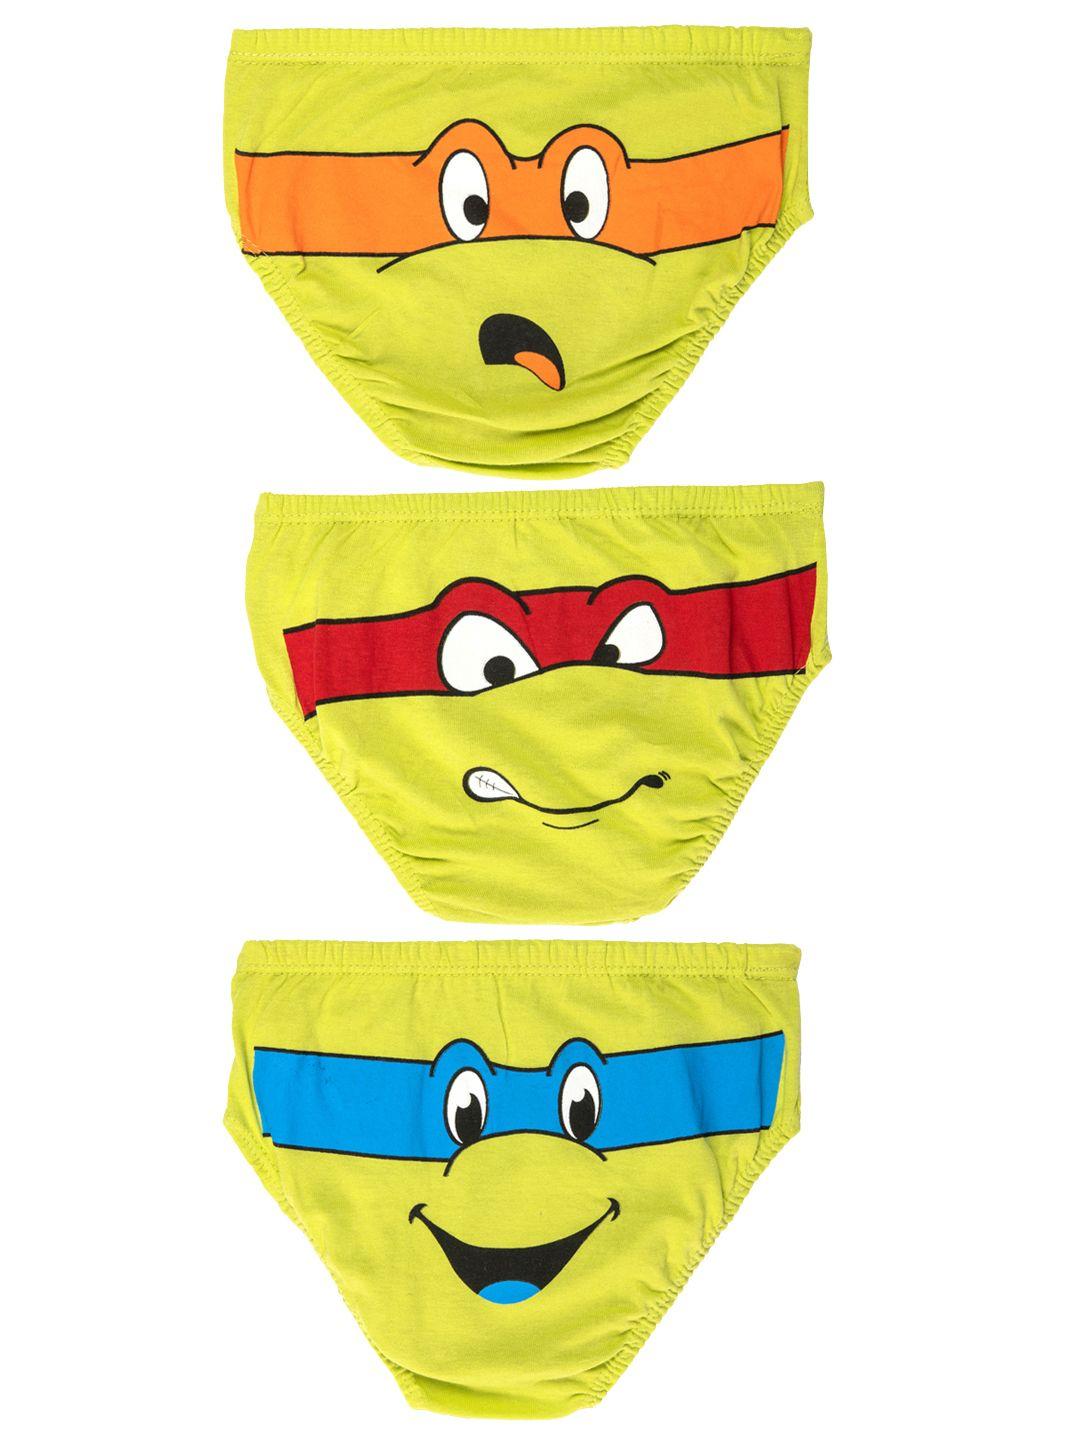 you-got-plan-b-boys-pack-of-3-yellow-briefs-time-to-turtle-ub-turtletime:-8-10